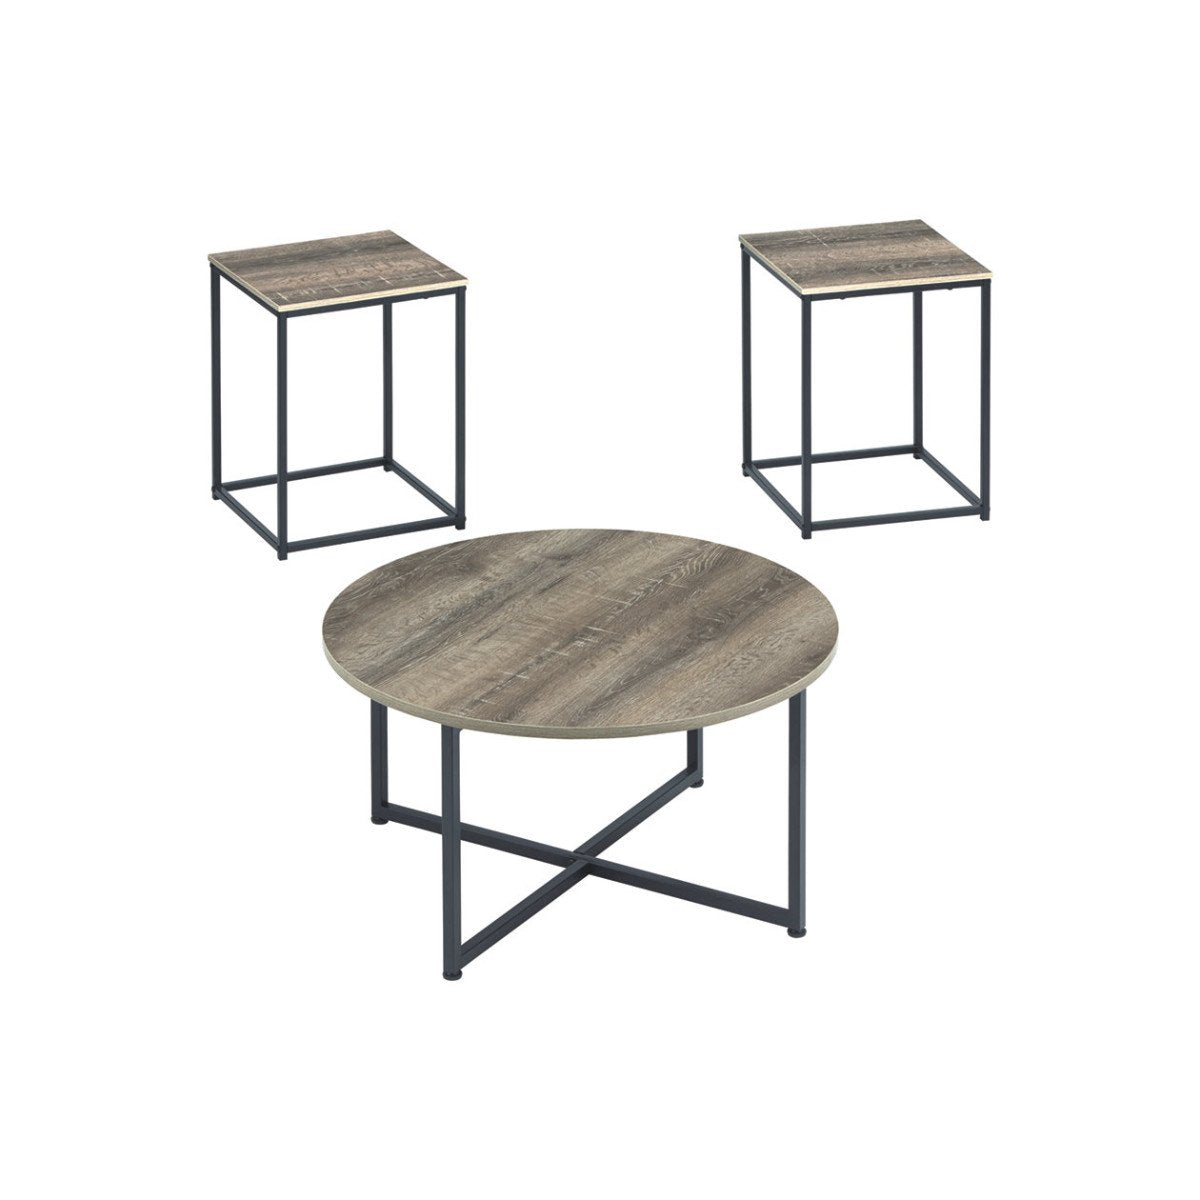 Wooden Table Set with Sturdy Metal Base, Set of Three, Gray and Brown - BM190103